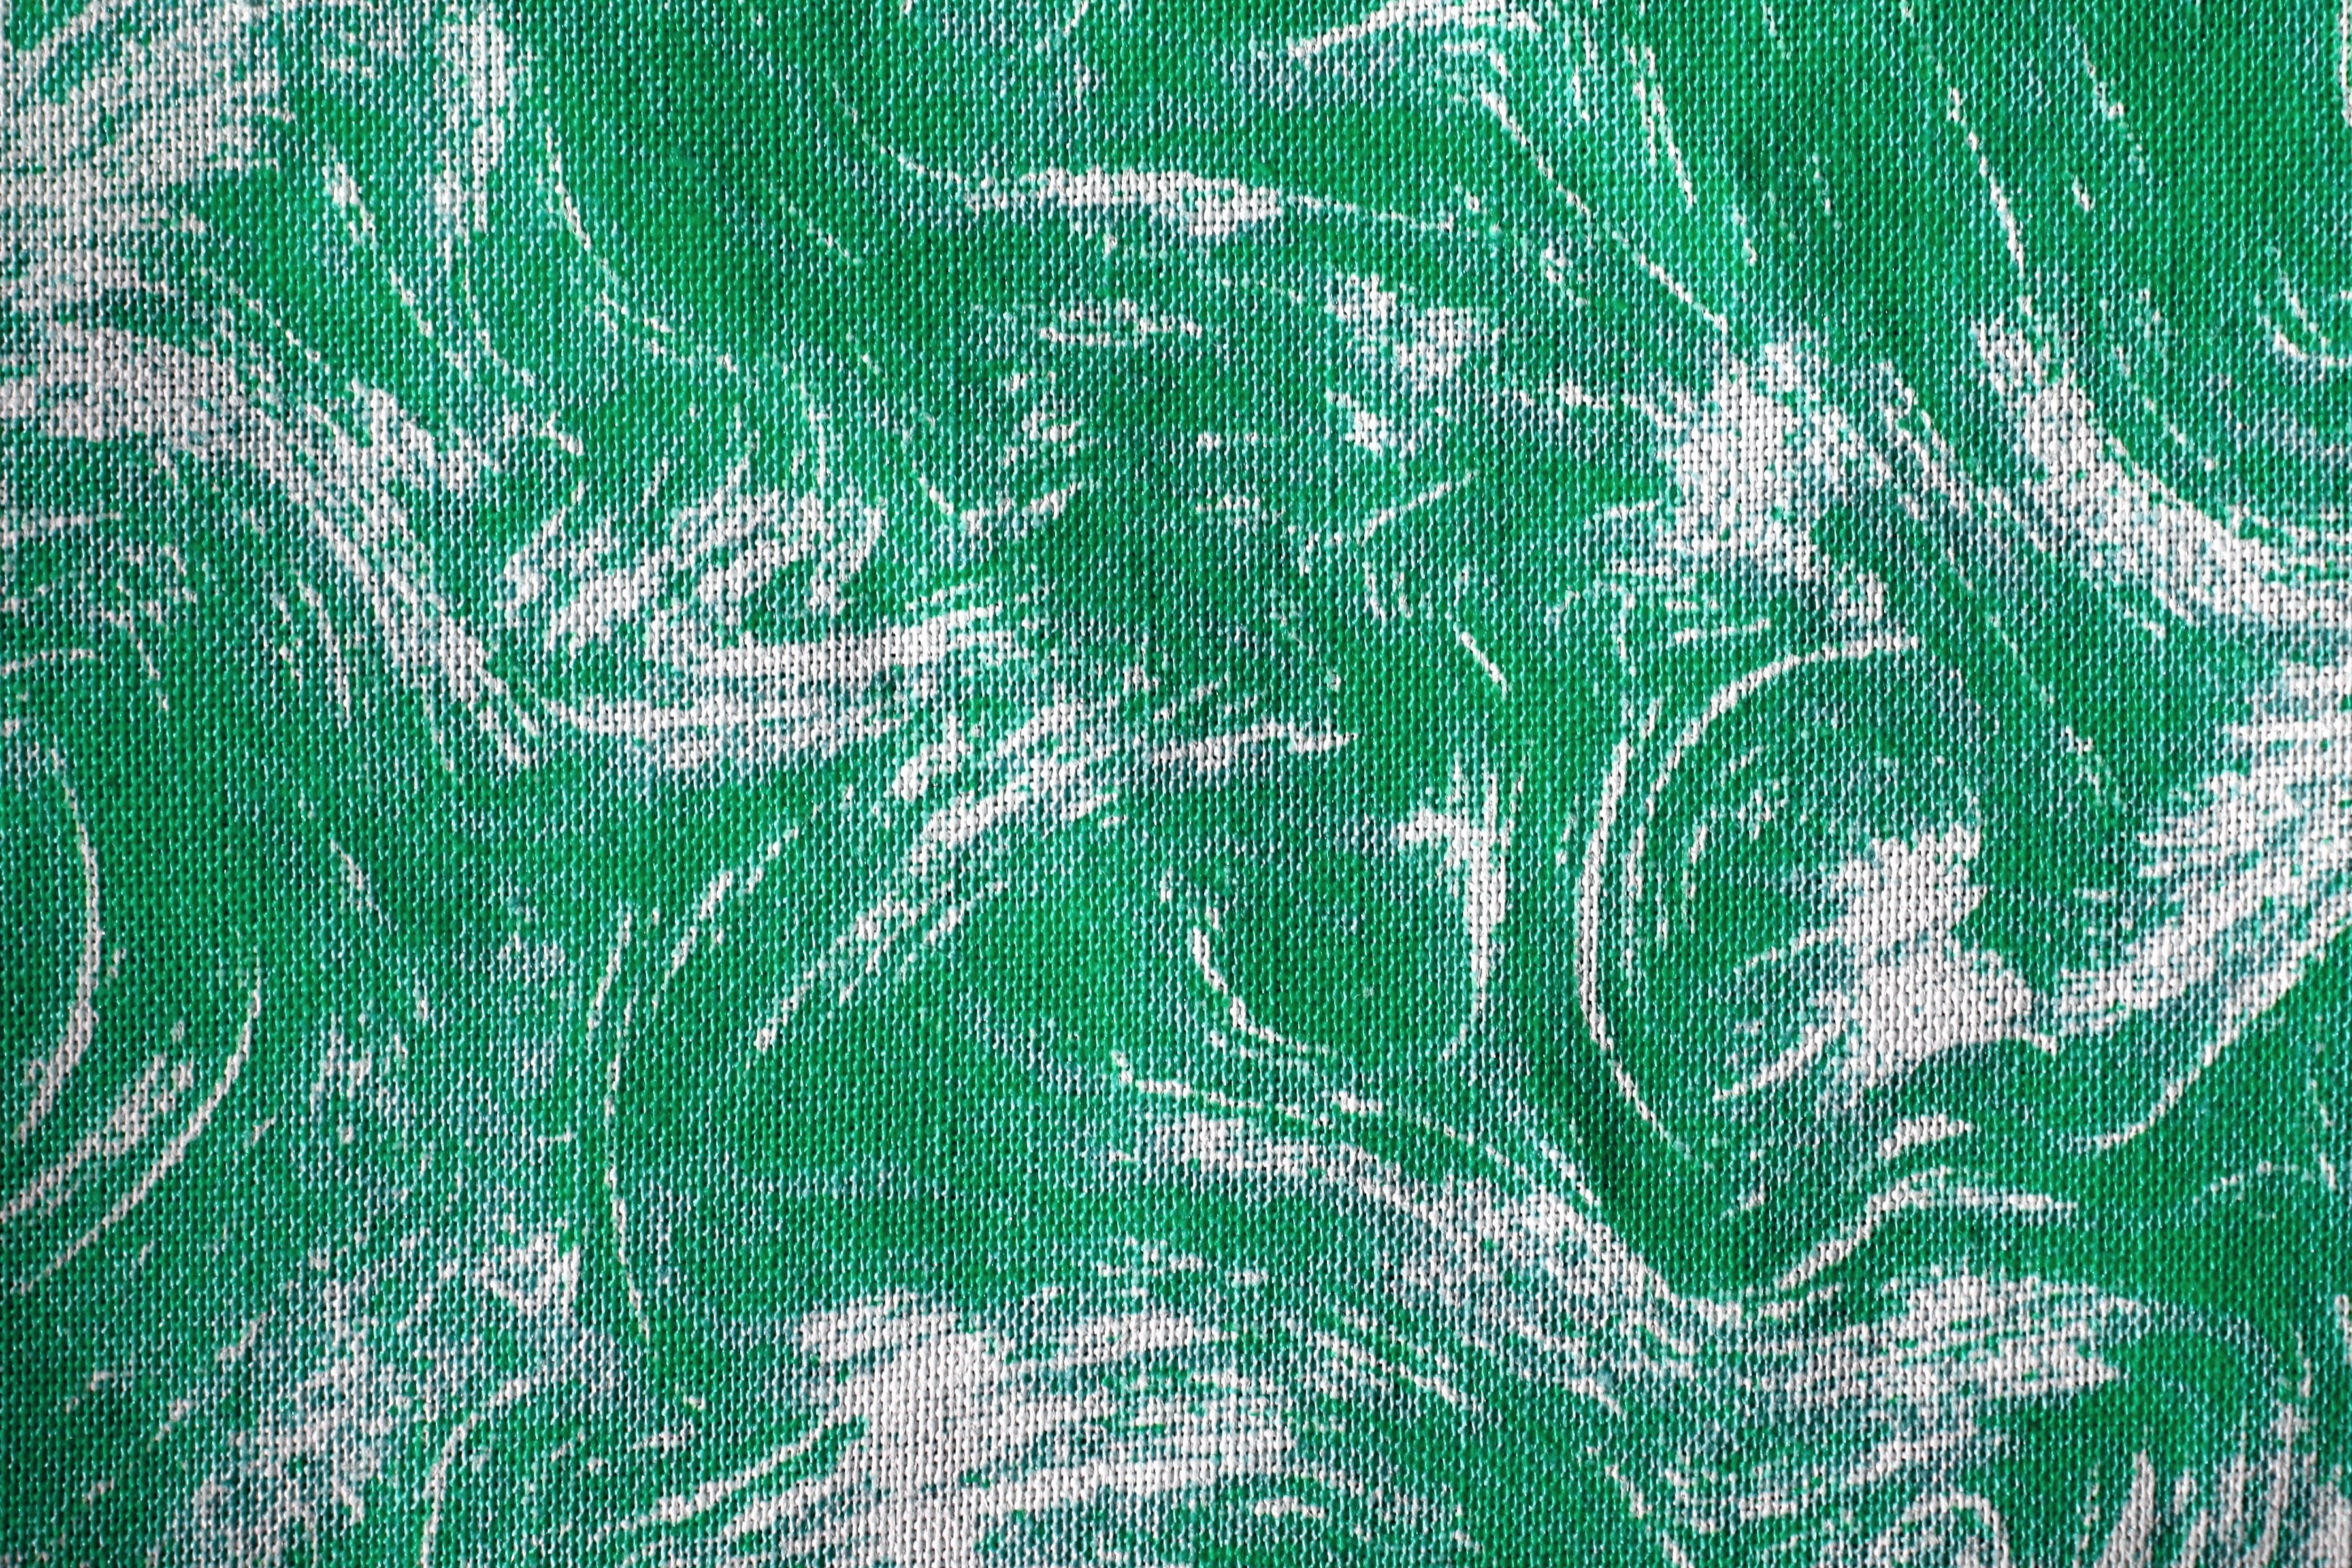 Fabric Texture with Green Swirl Pattern Picture | Free Photograph ...